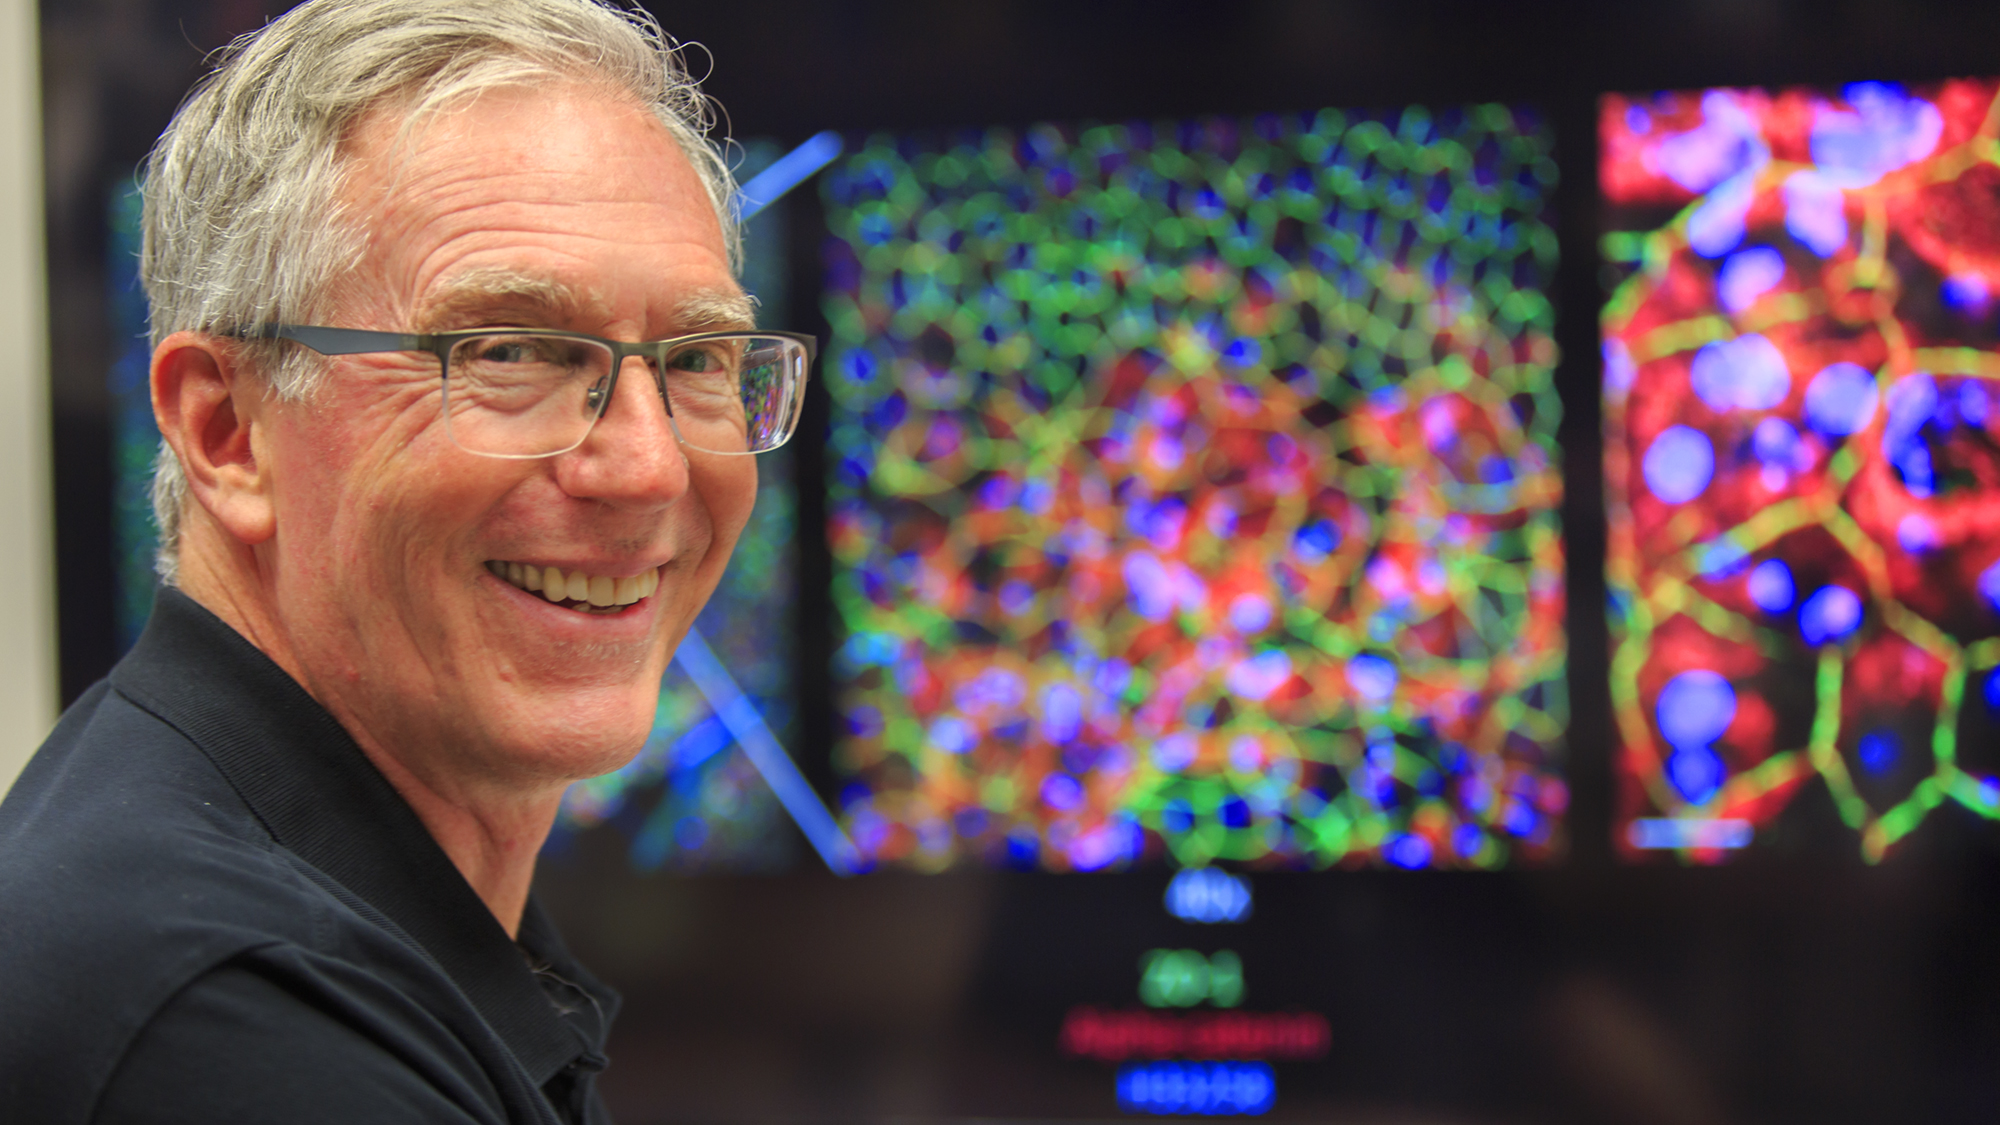 Dr. Nickerson standing in front of computer screens where cell structures and pathologies are displayed in brilliant colors